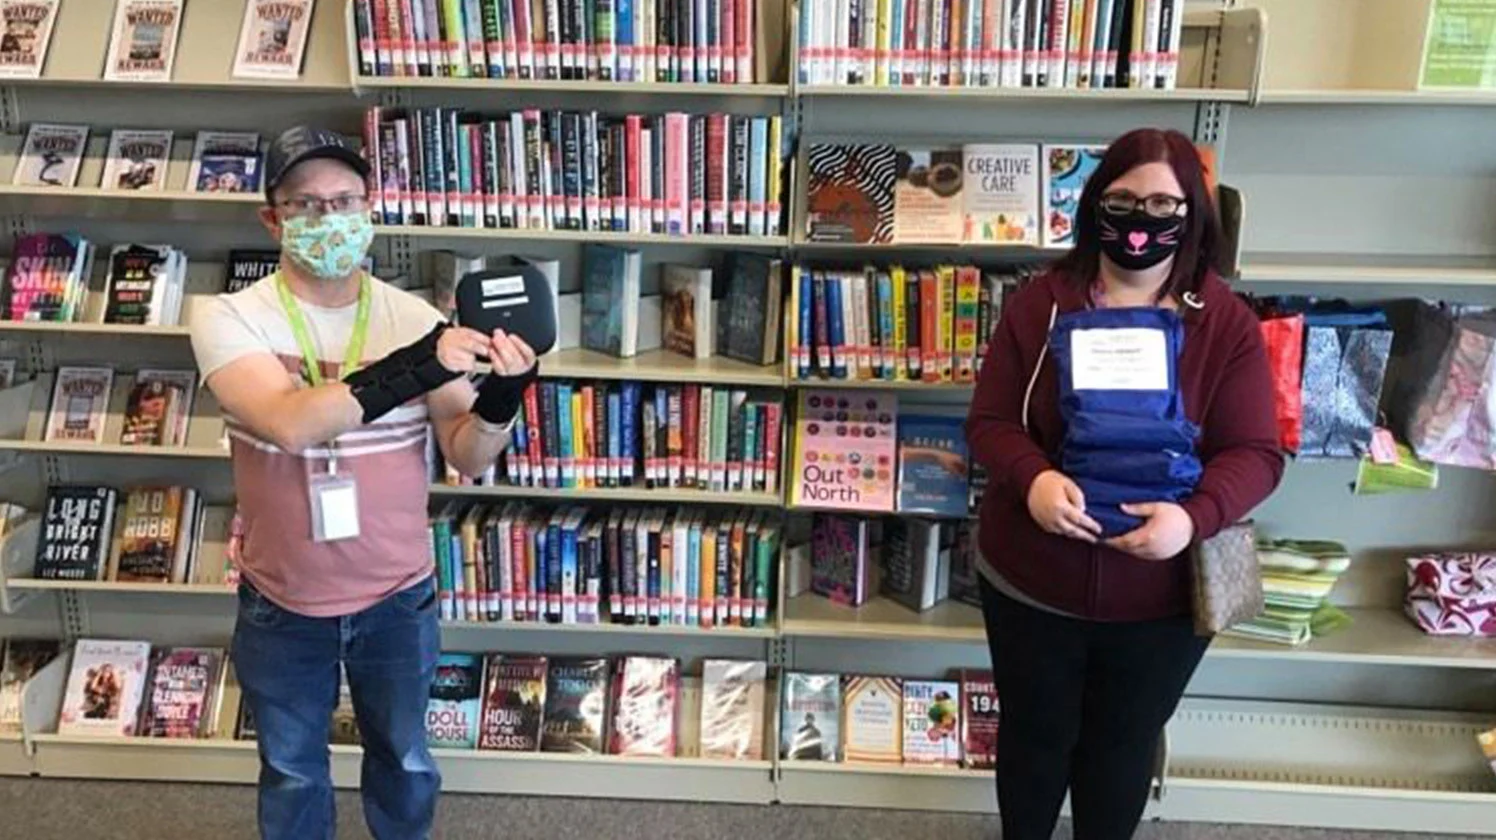 Corey Chernuka and Hailey McCullough show off the new Smart Hub devices available to the public through the Grande Prairie Public Library. The internet lending program is “another way we show our community we care,” says McCullough. PHOTO SUBMITTED